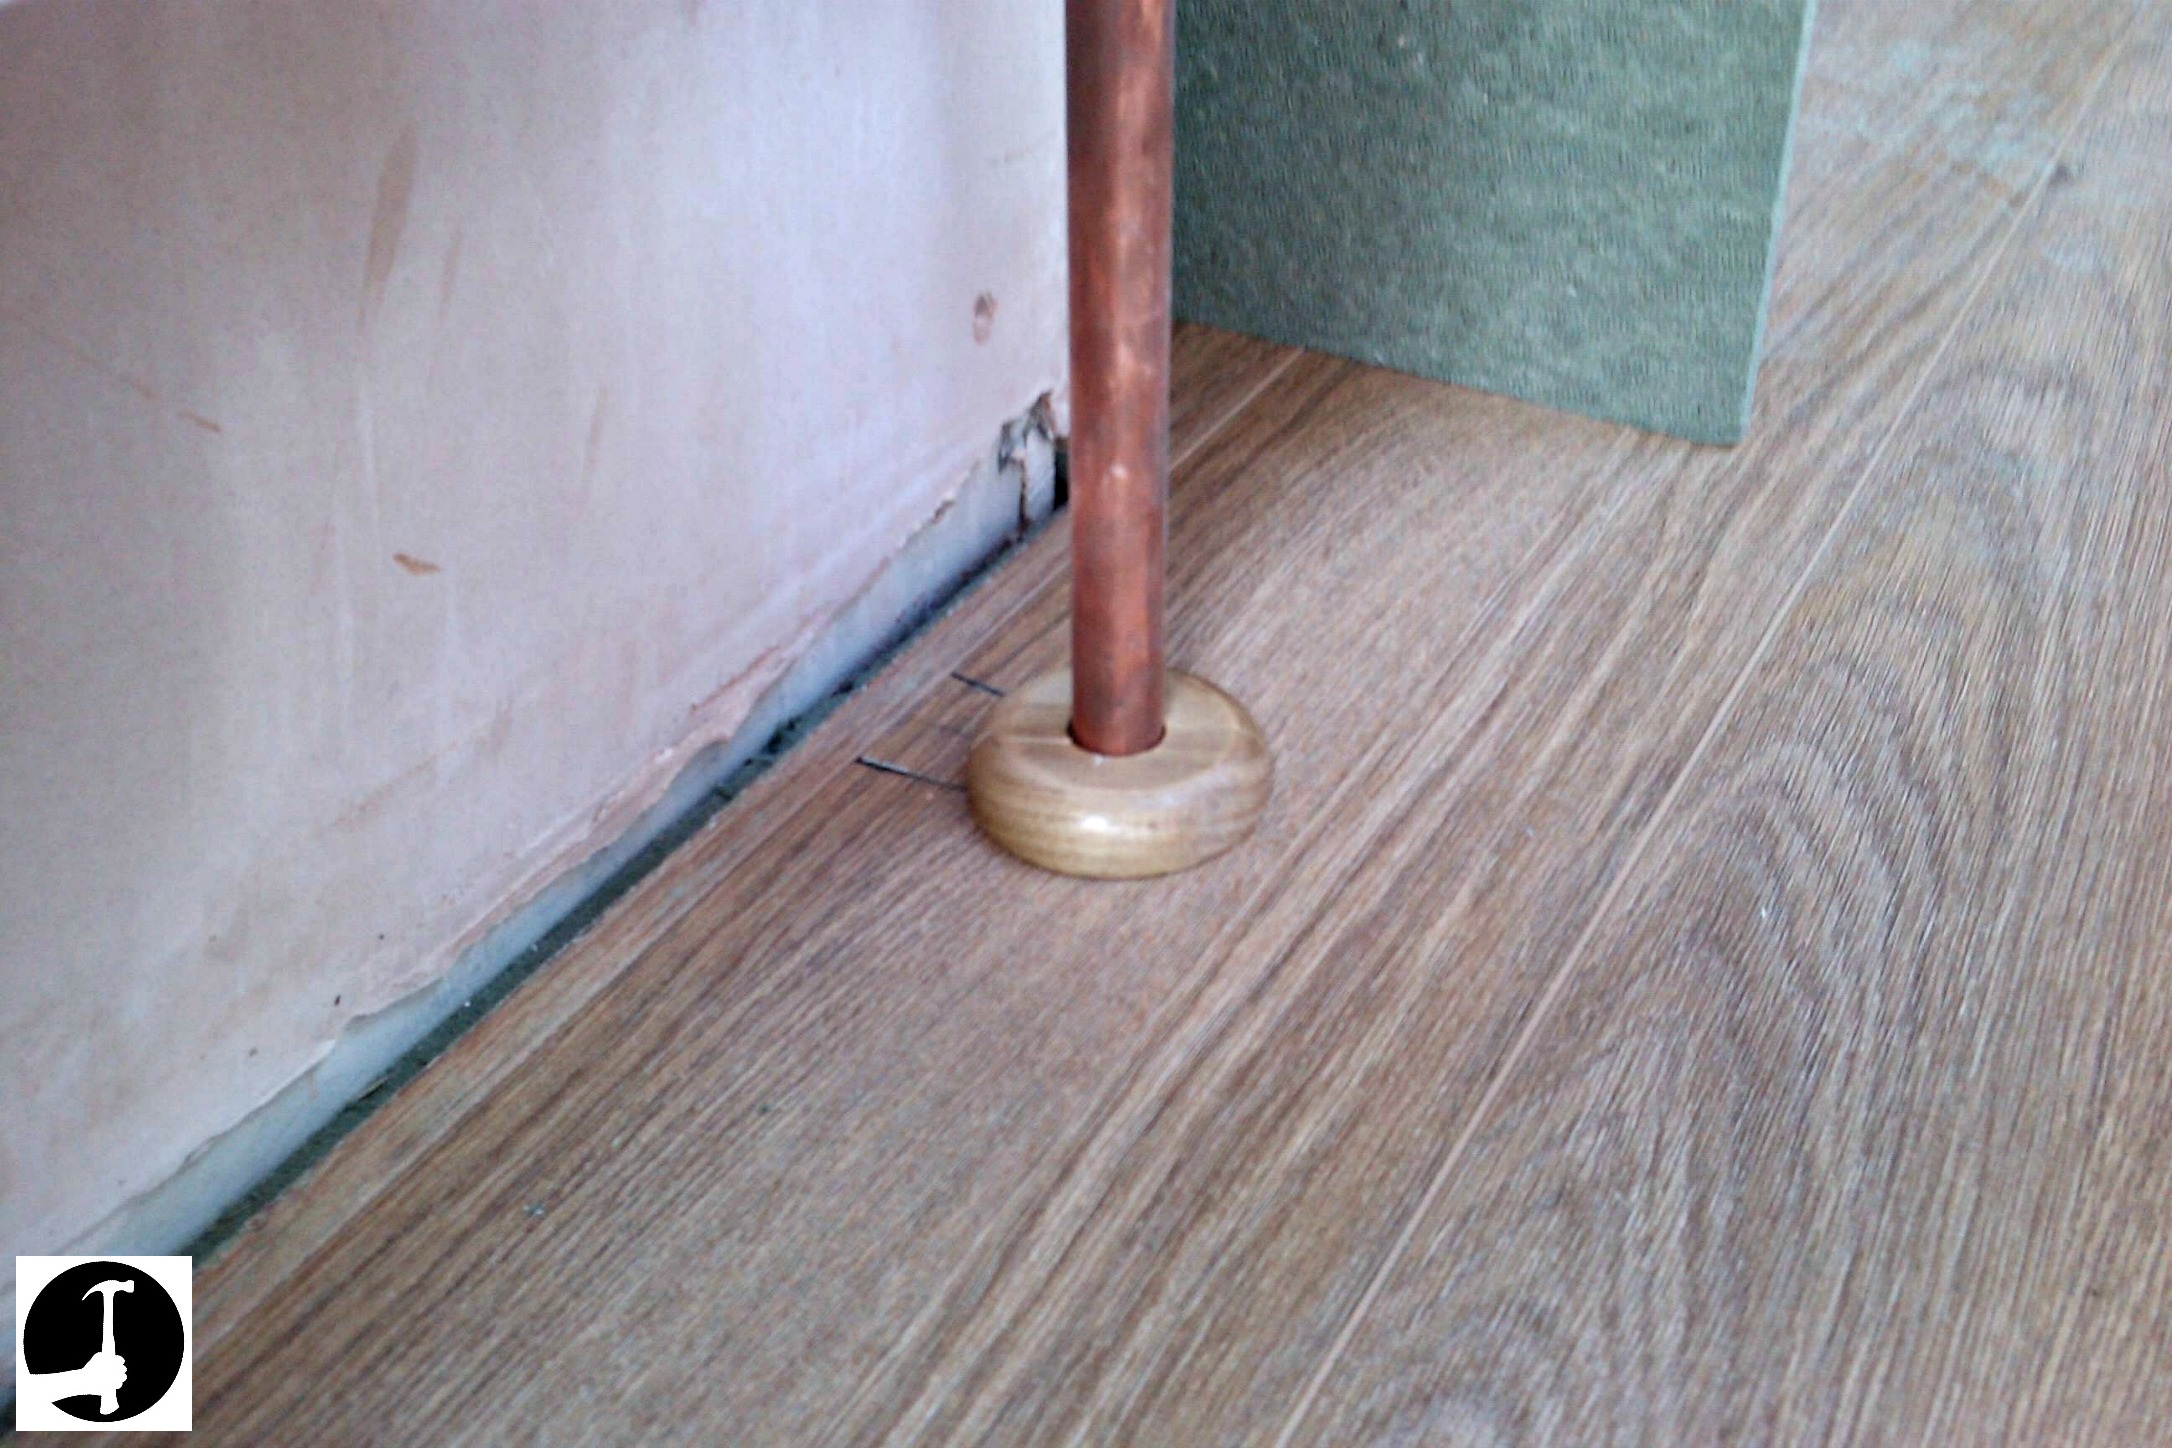 See How I Install Laminate Flooring To, How To Cut Around Radiator Pipes